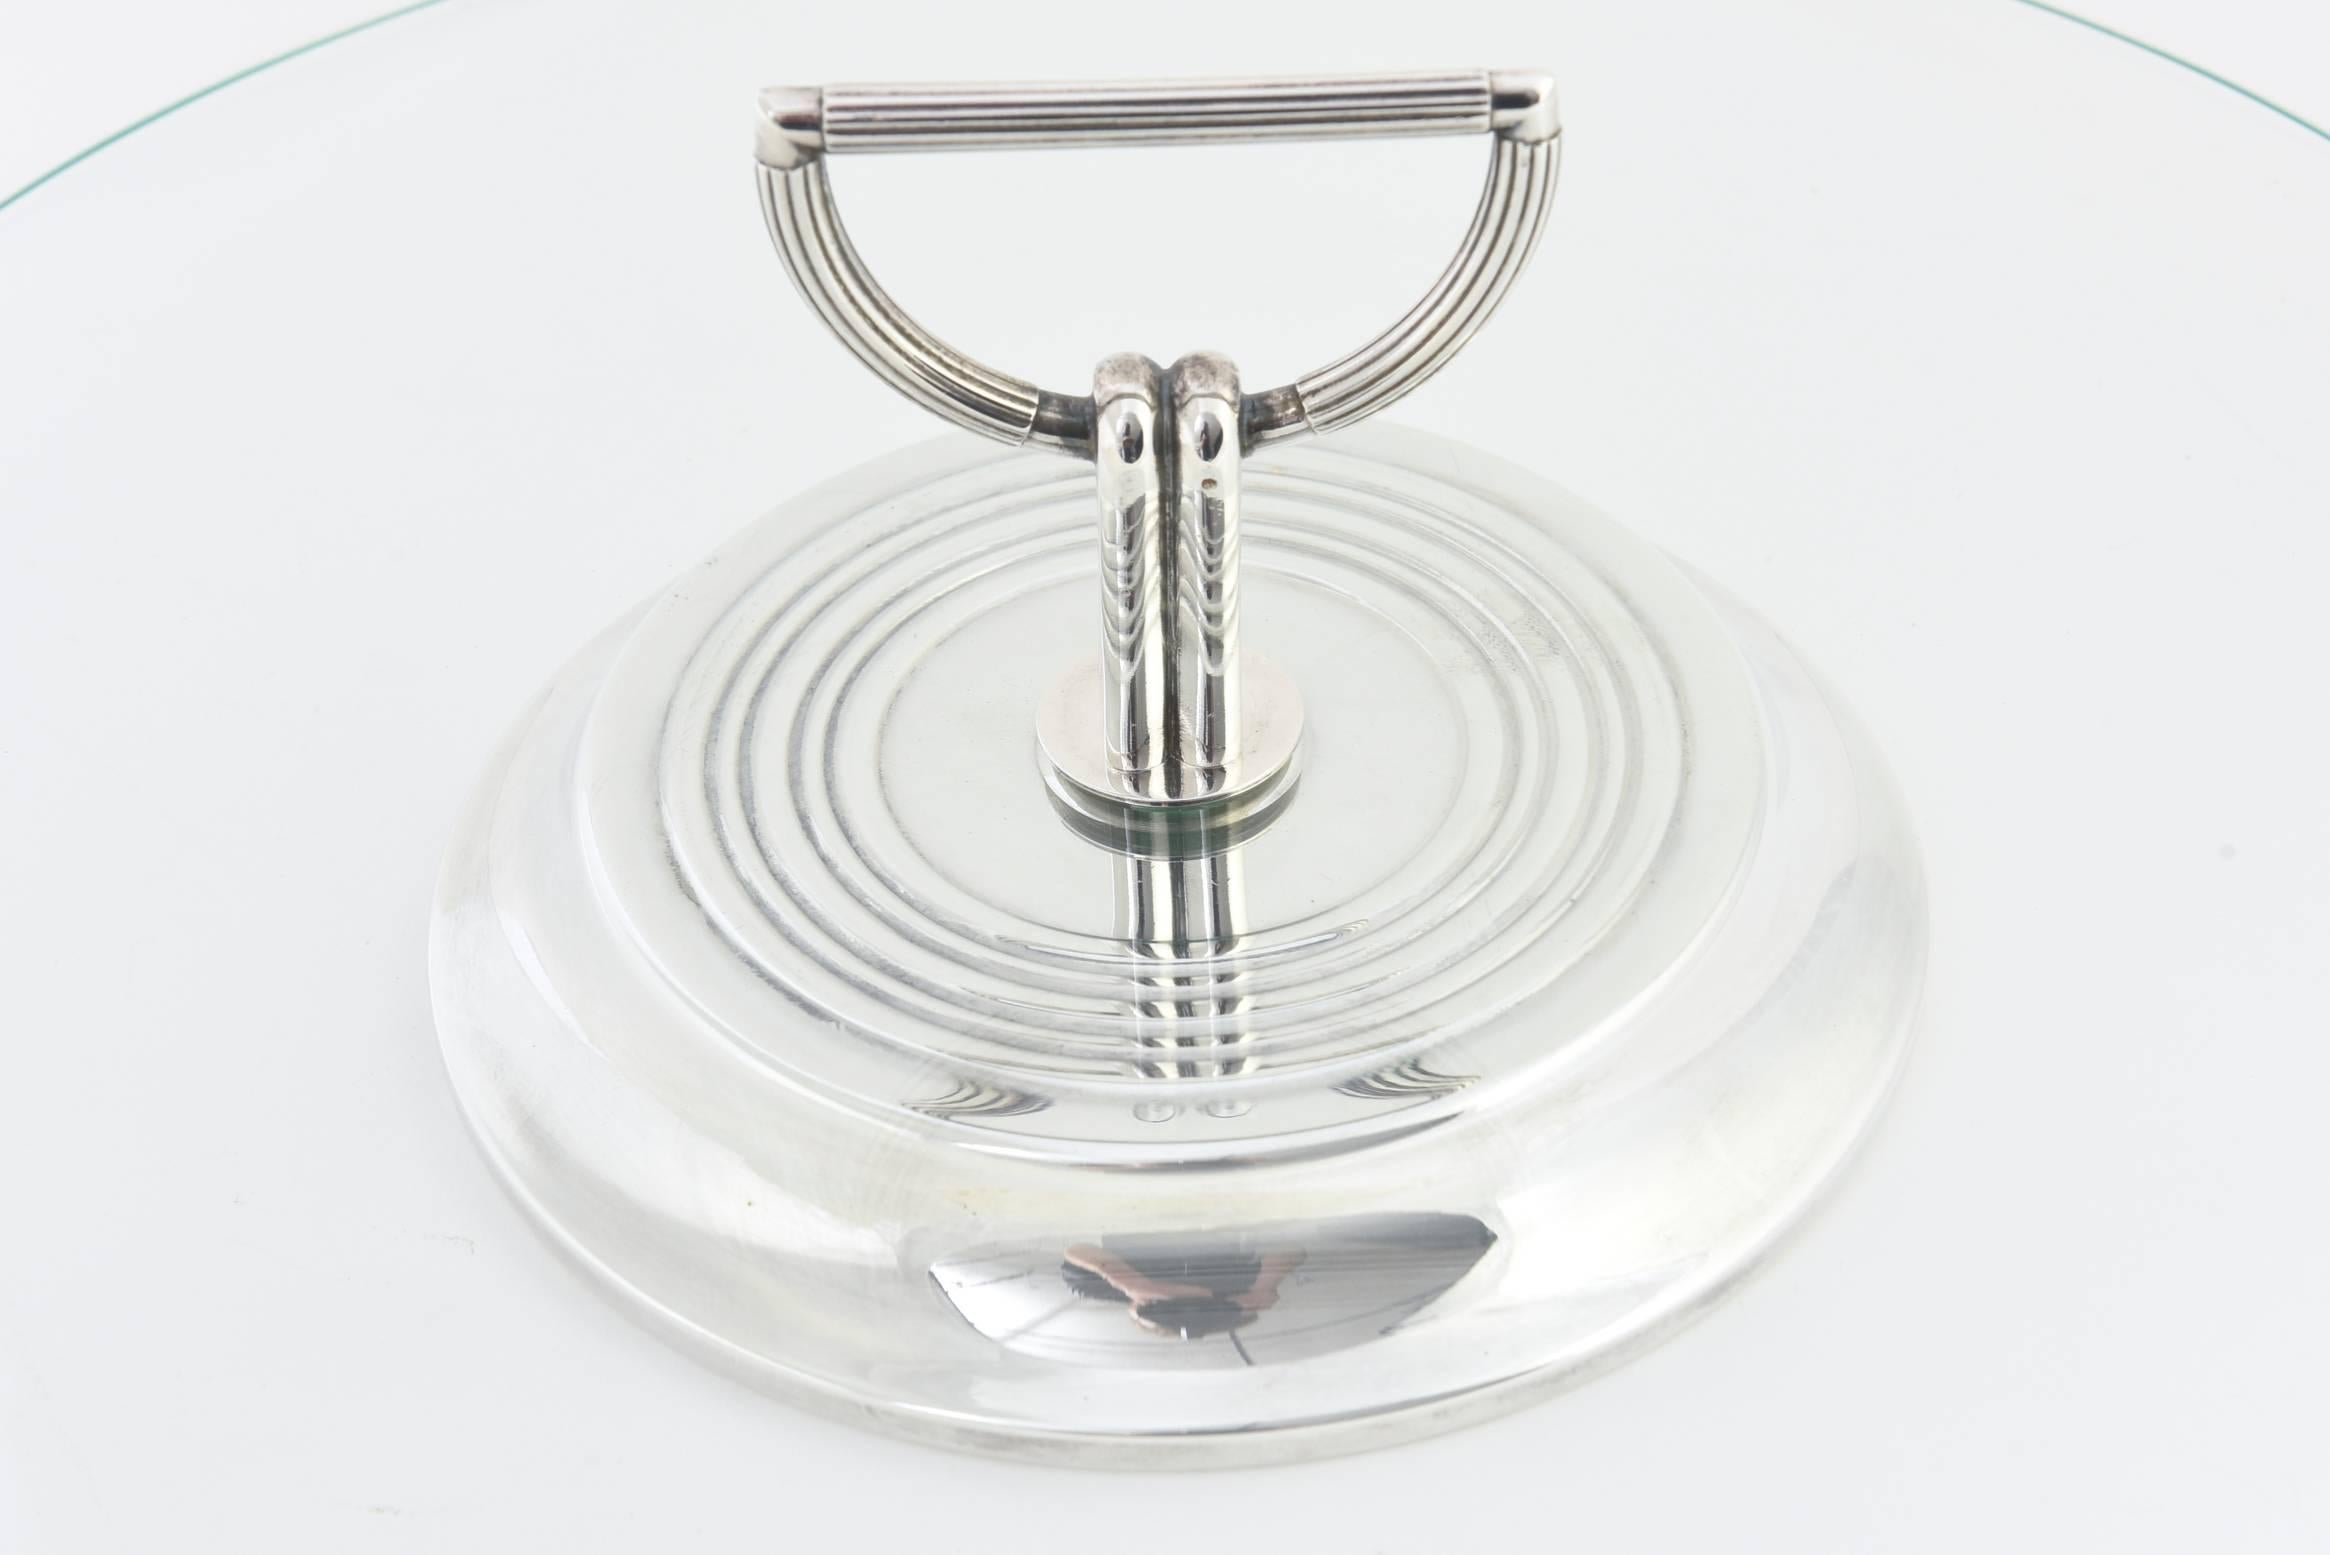 Midcentury Christofle Vibrations pattern silver plate and glass cheese / appetizers / hors d'oeuvres tray featuring a silver plate centre section on a base. The center section can be taken apart to clean.

Marked Christofle.
 